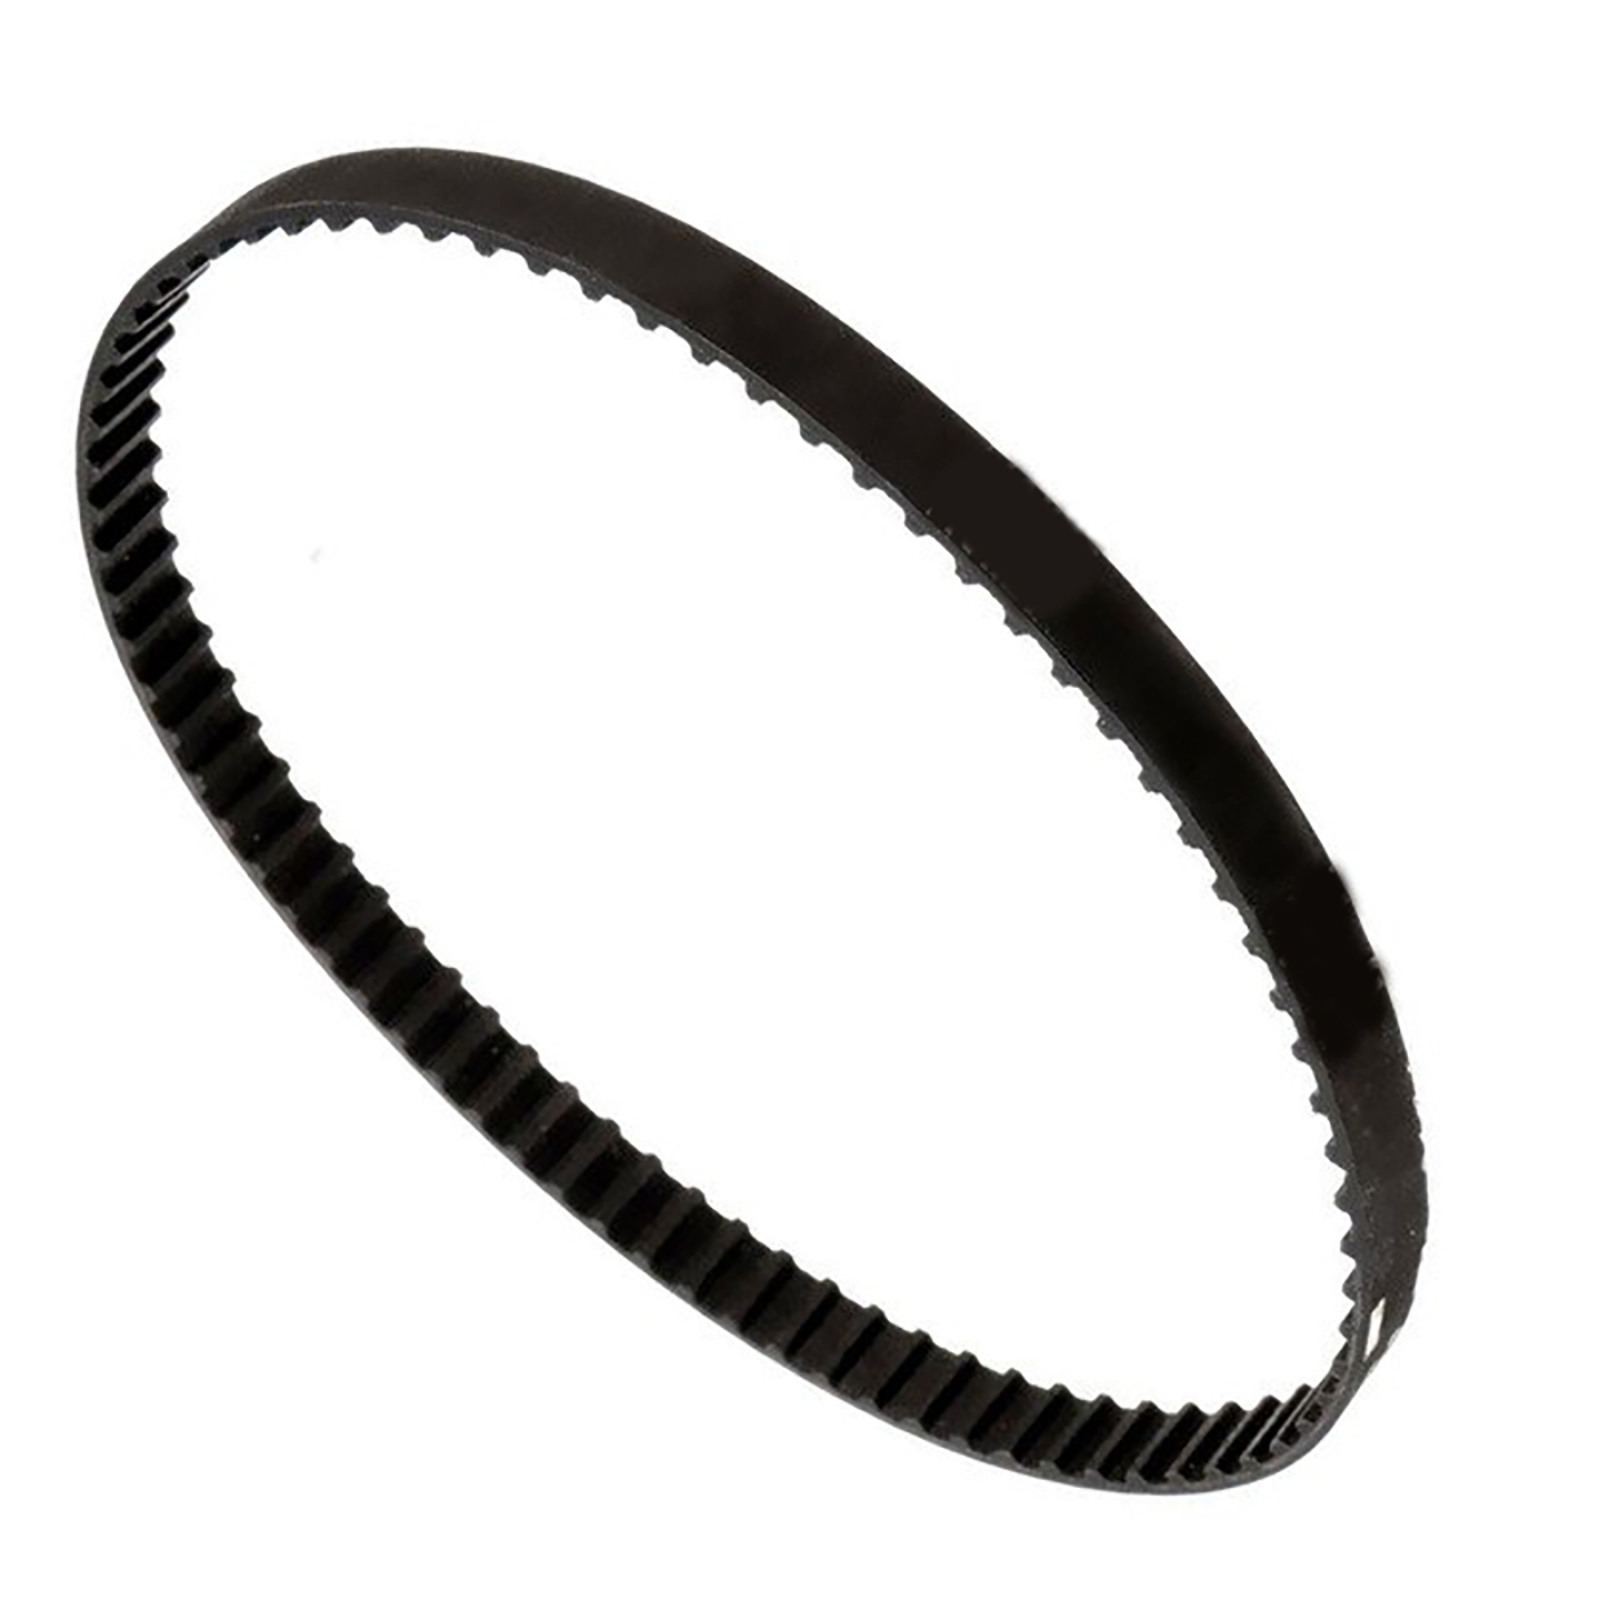 Replacement Part Toothed Drive Belt for Rockwell Sander